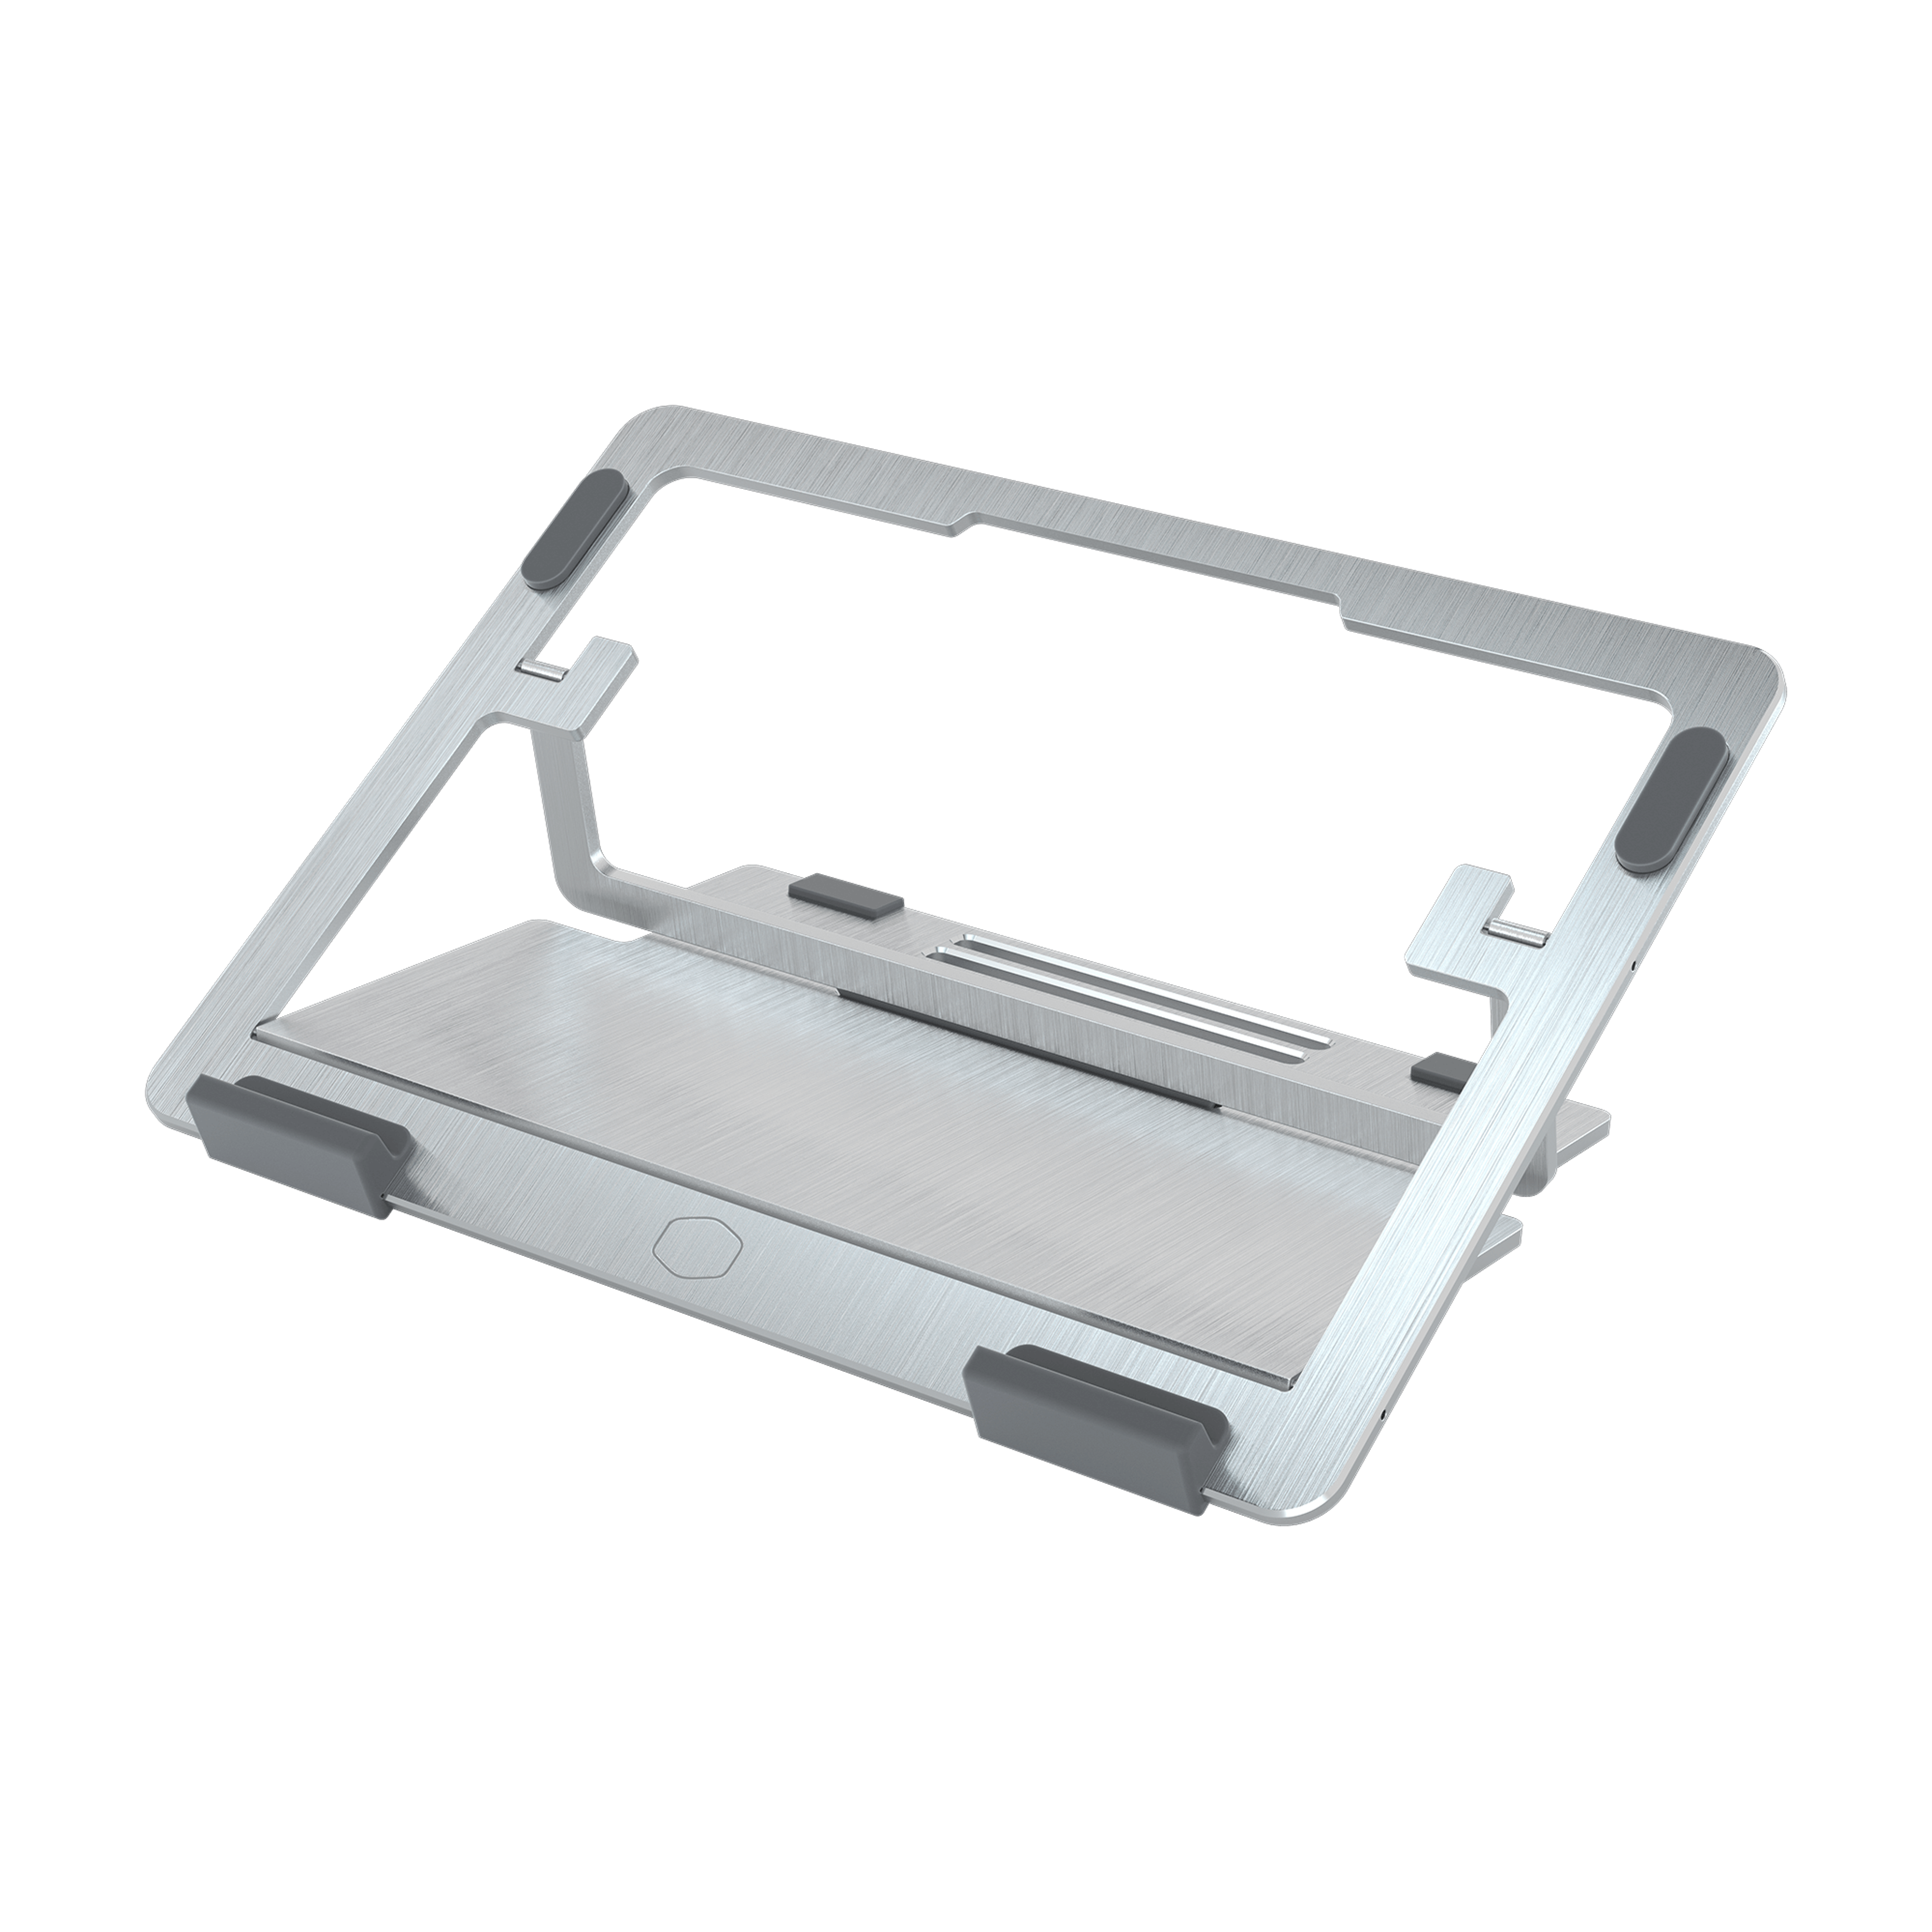 Cooler Master ErgoStand Air Silver | Laptop Cooler and Stand